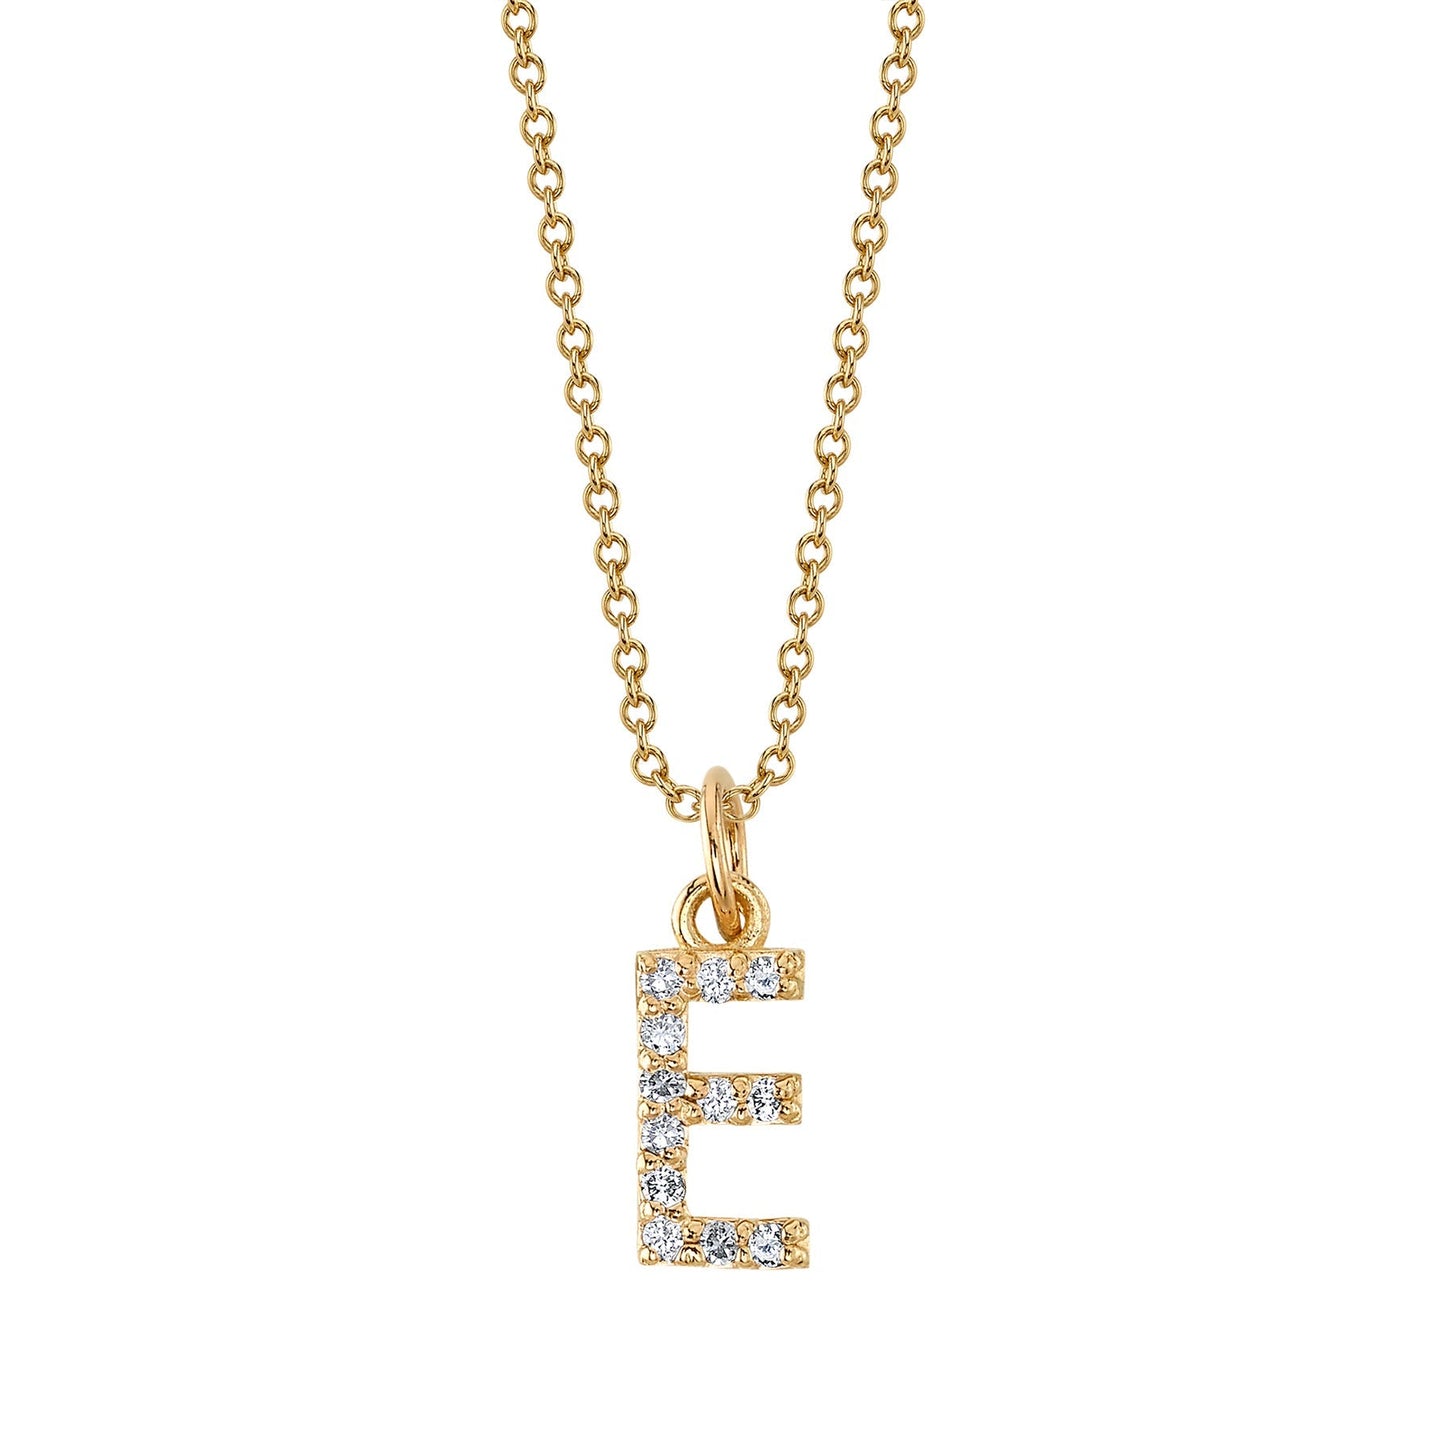 E Initial Birthstone Charm Necklace